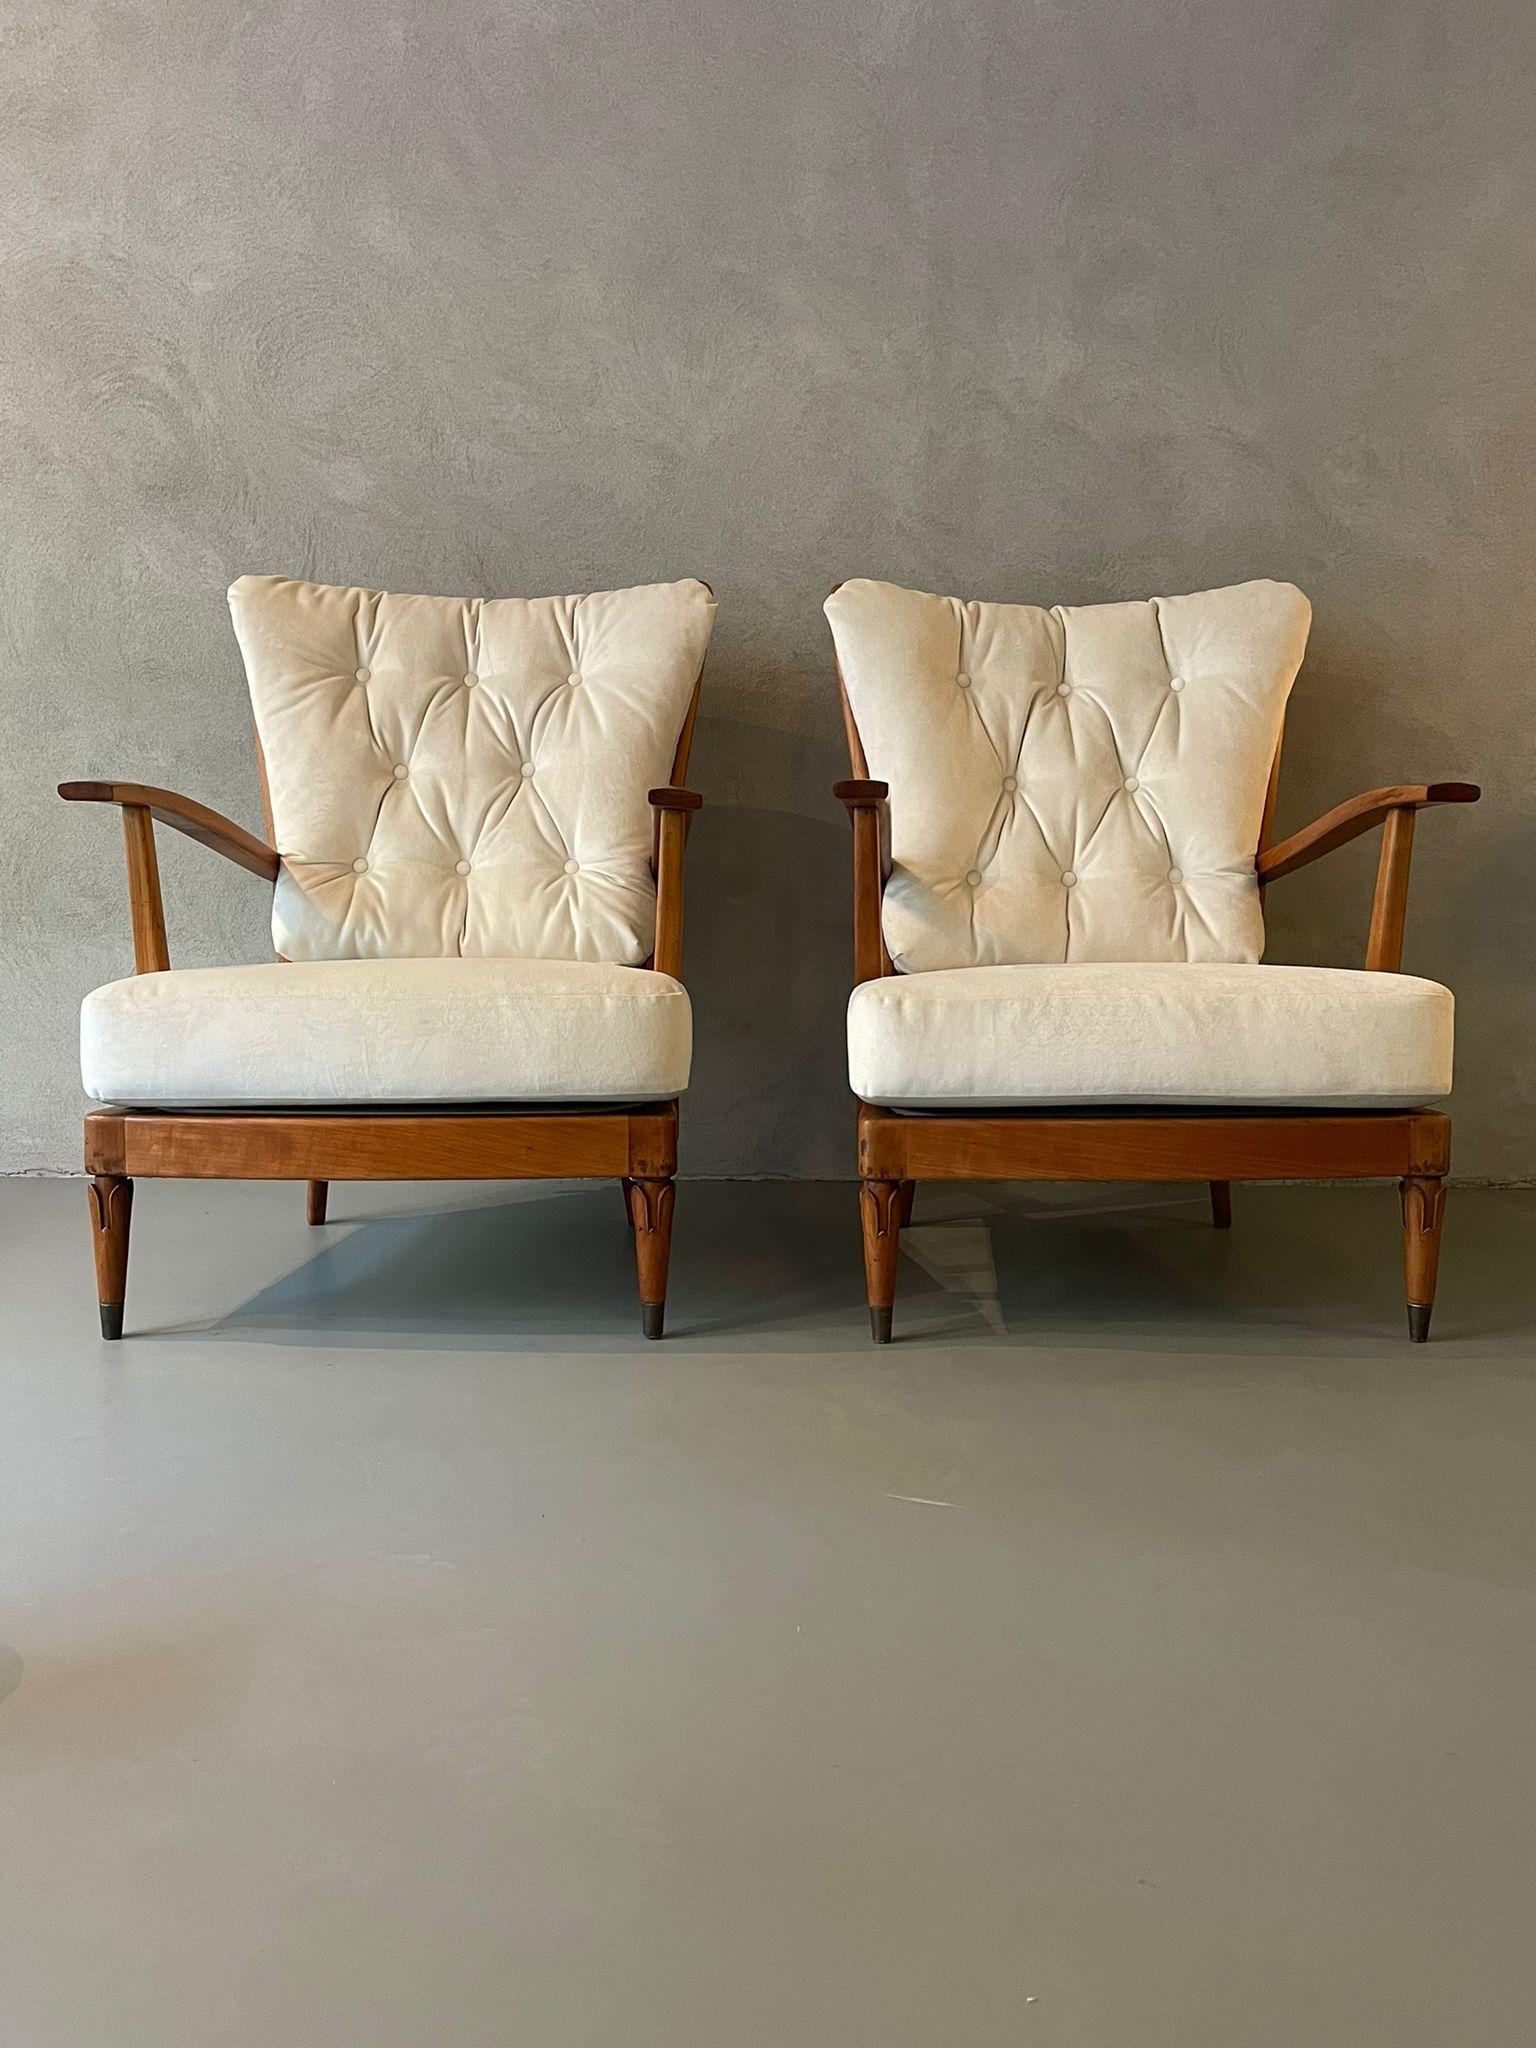 Pair of armchairs by Paolo Buffa, produced in Cantù, 1950s
Restored structure in cherry wood, new upholstering seat and backrest in white velvet.
Together with a certificate of expertise from the Eredi di Angelo Marelli s.a.s., Paolo Buffa